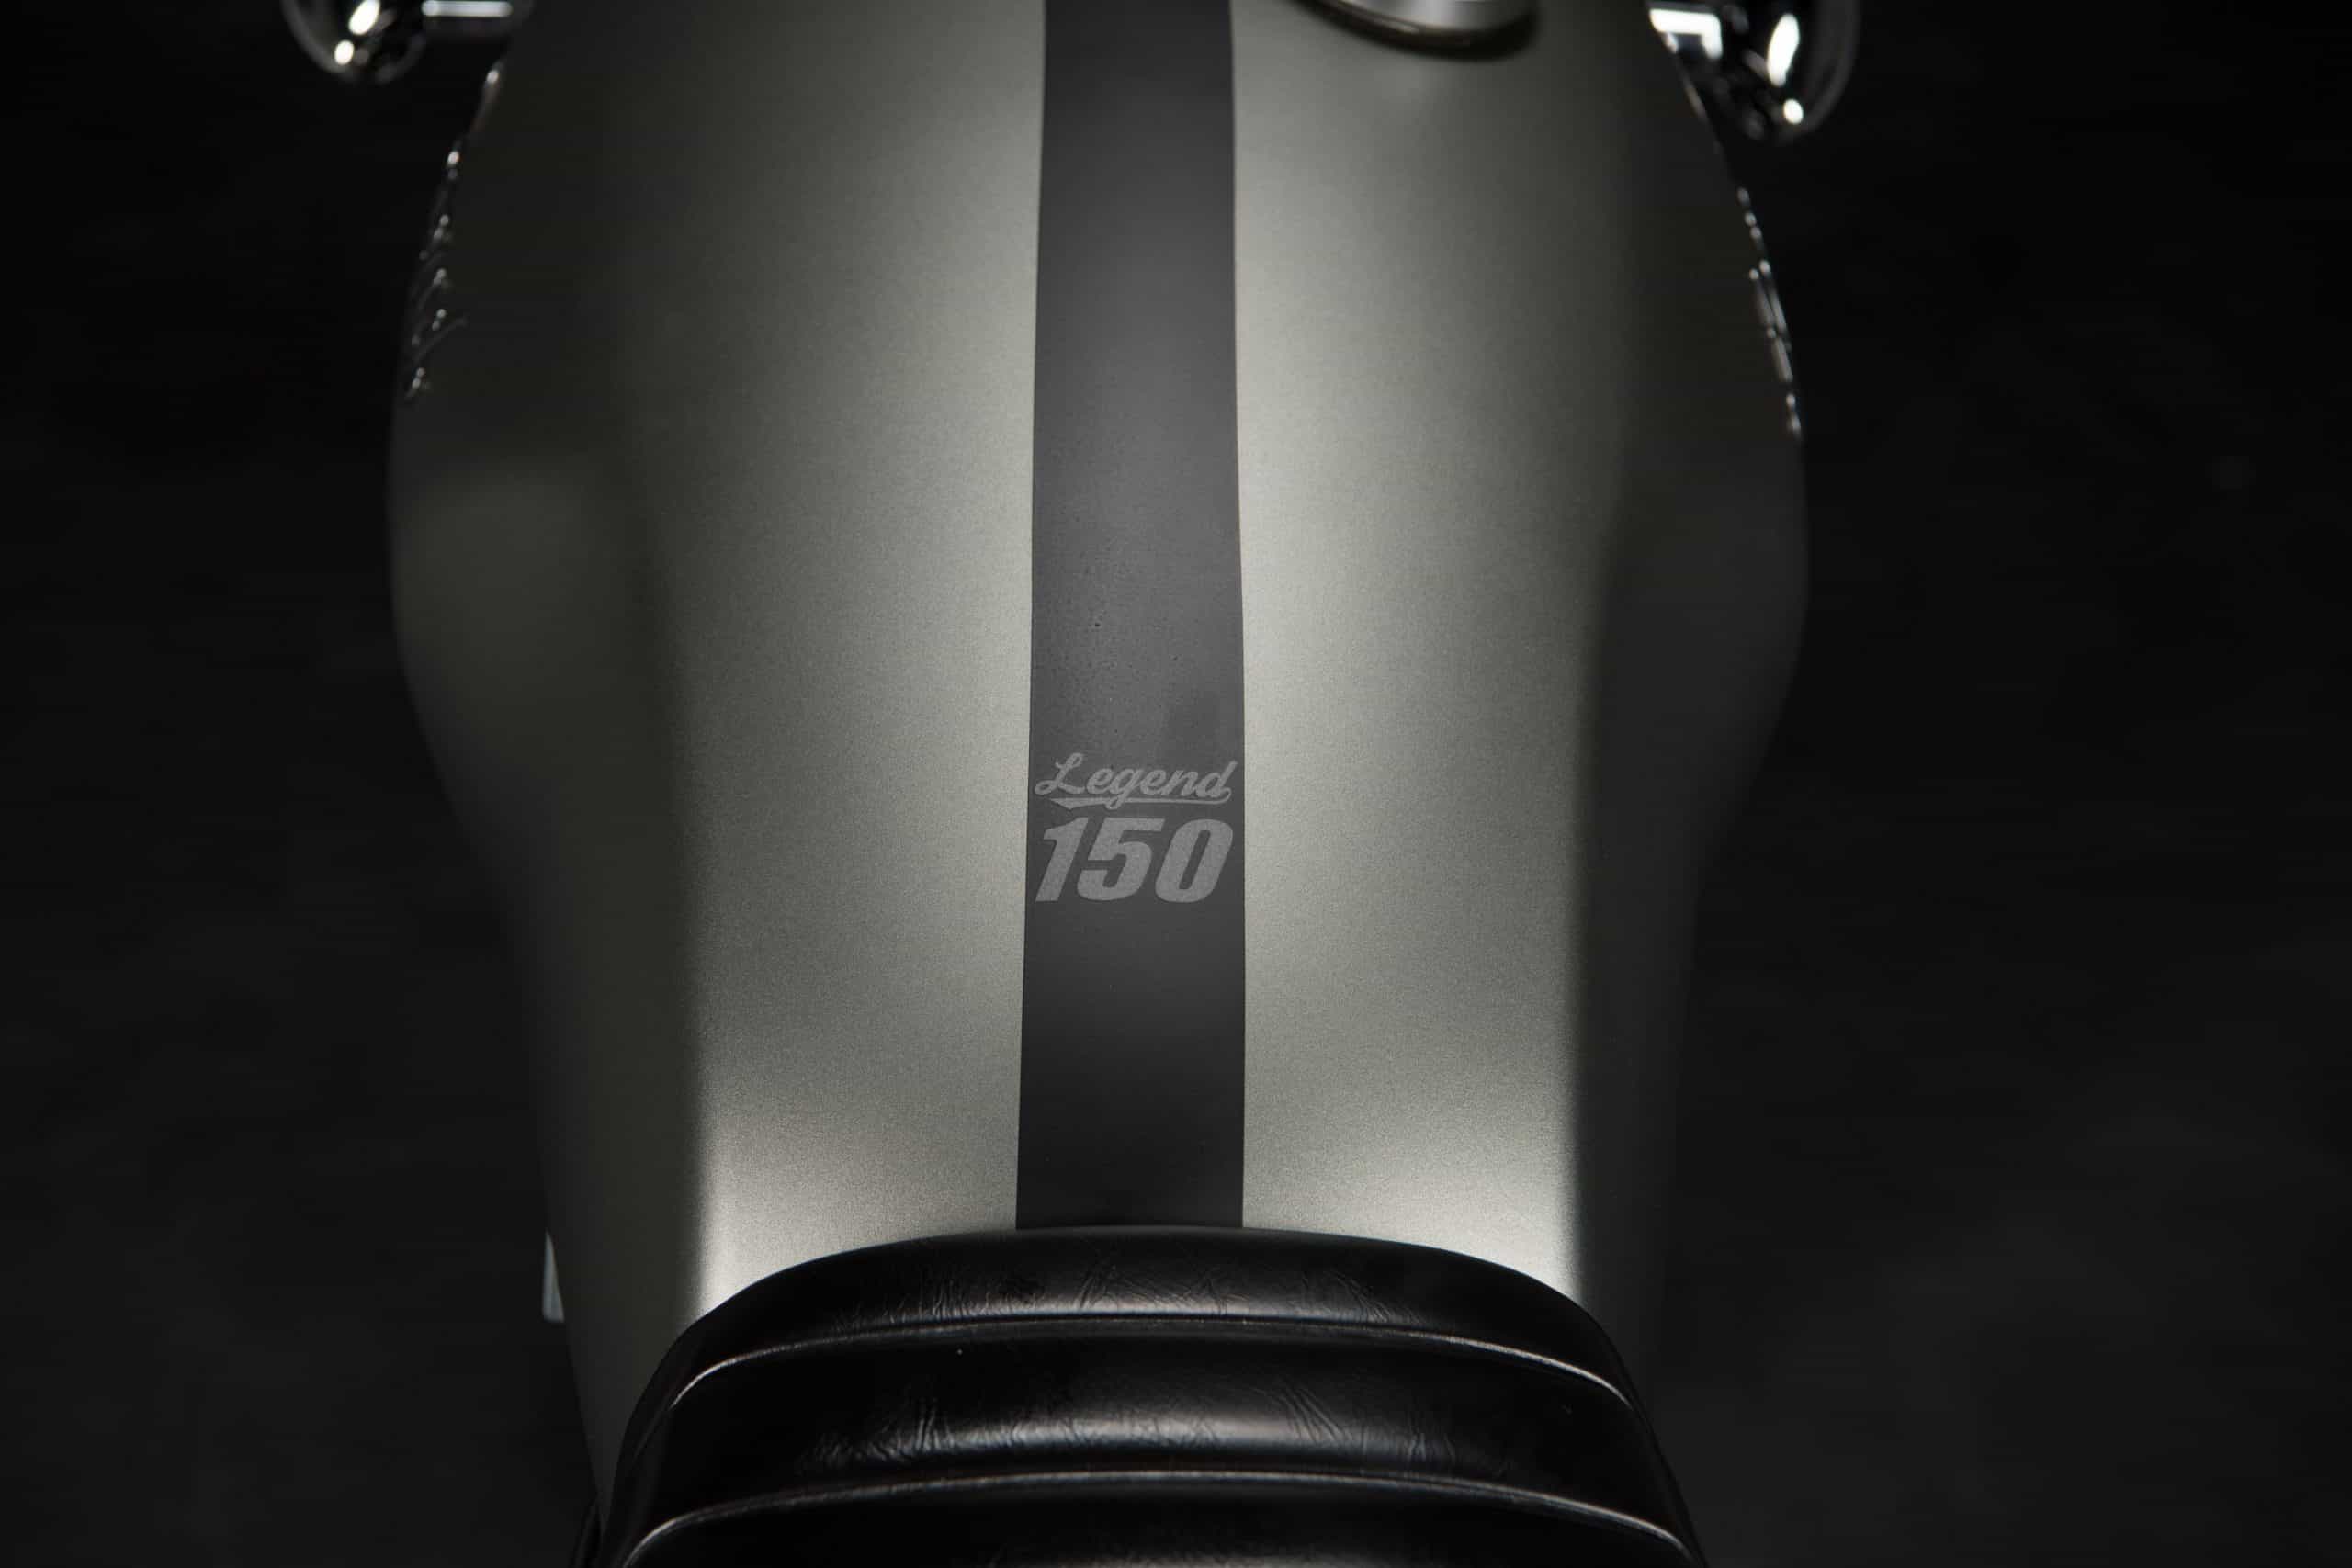 gpx legend 150s feature 03 1 scaled